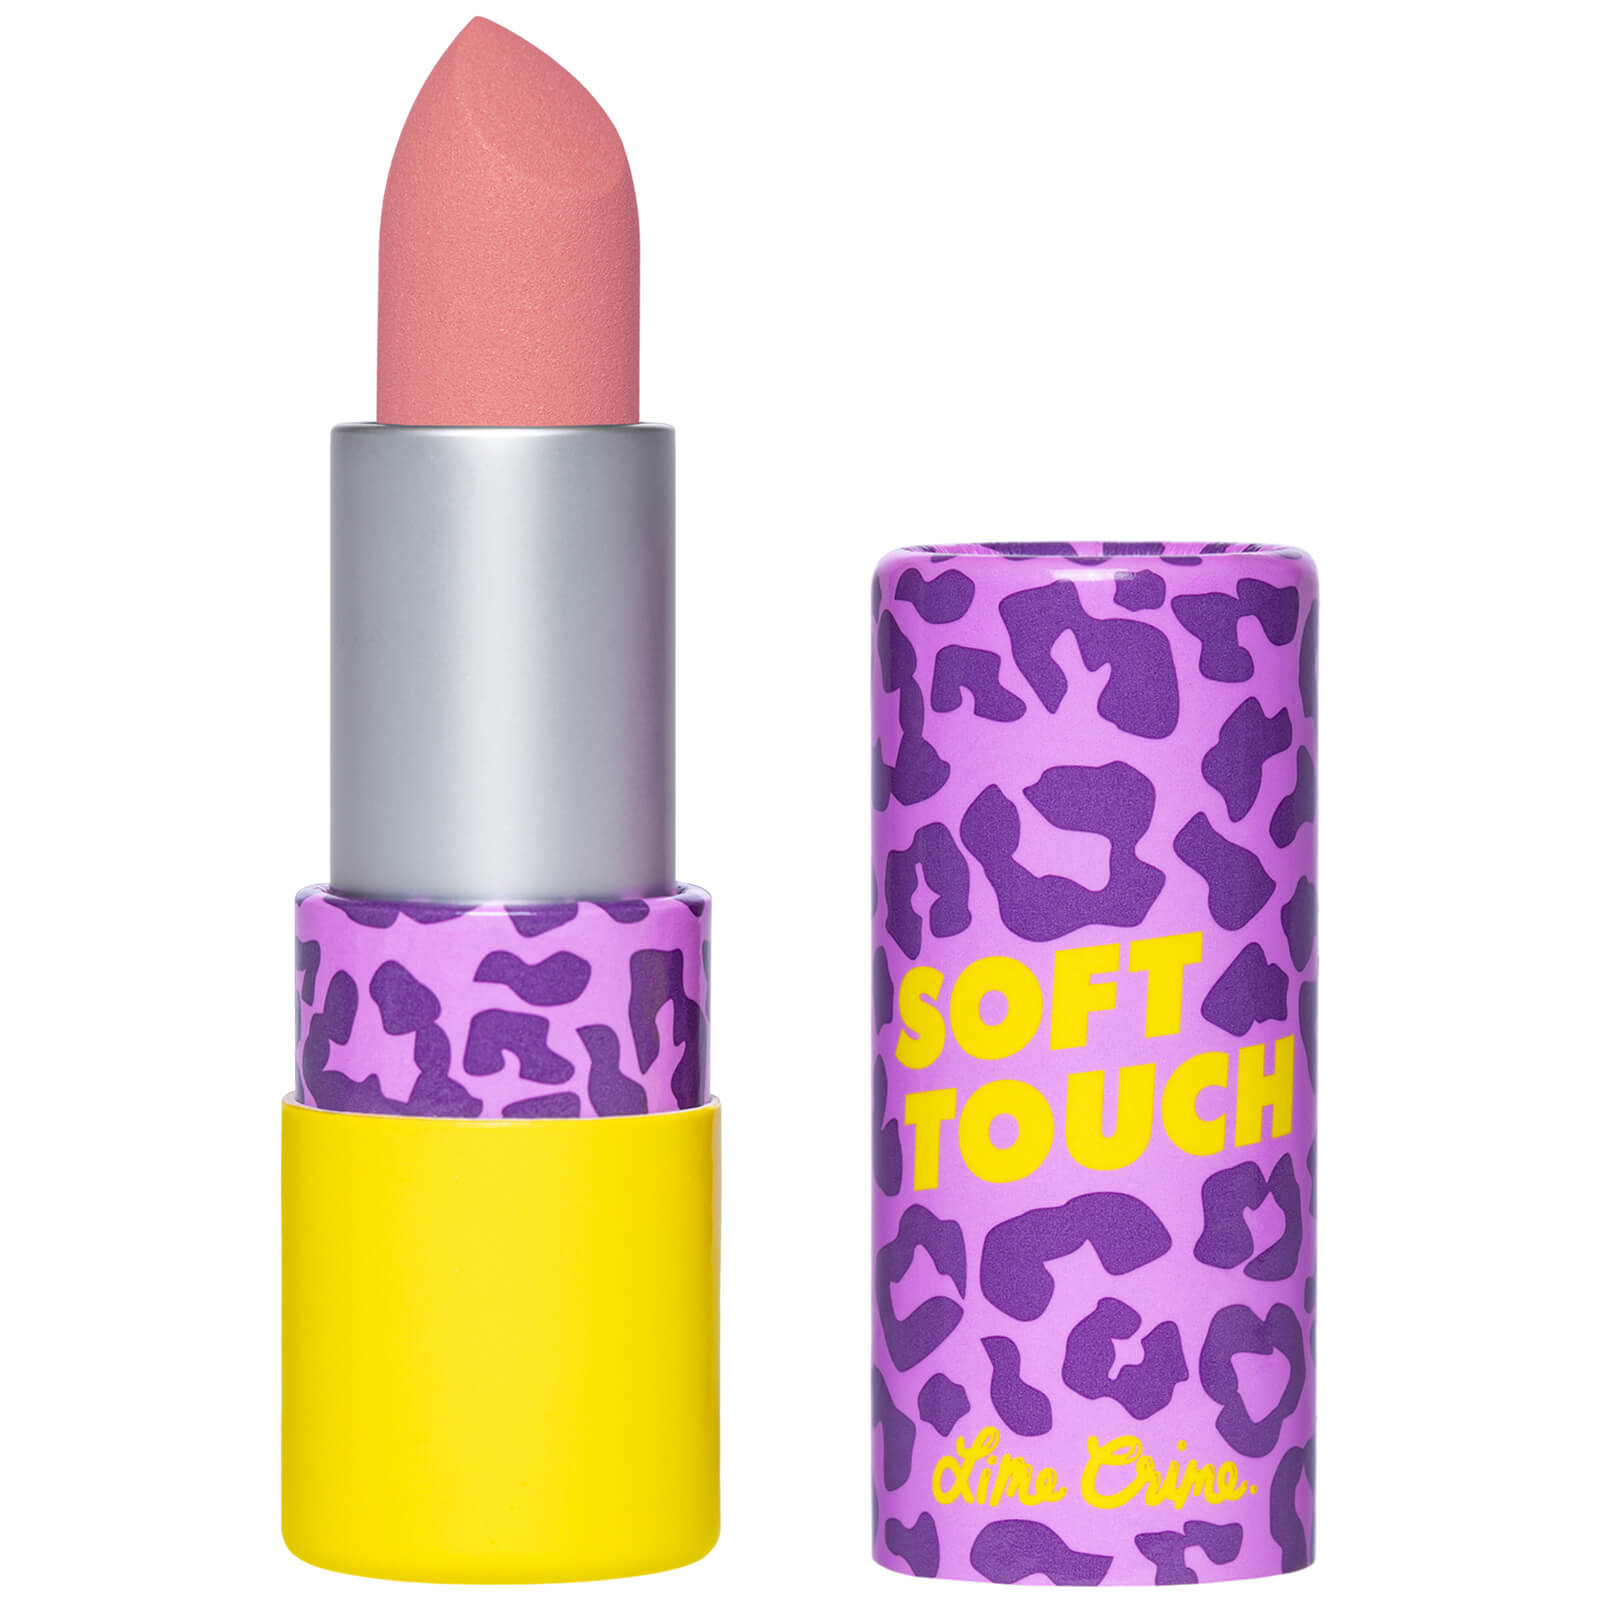 Lime Crime Soft Touch Lipstick 4.4g (Various Shades) - Flamingo Pink von Lime Crime